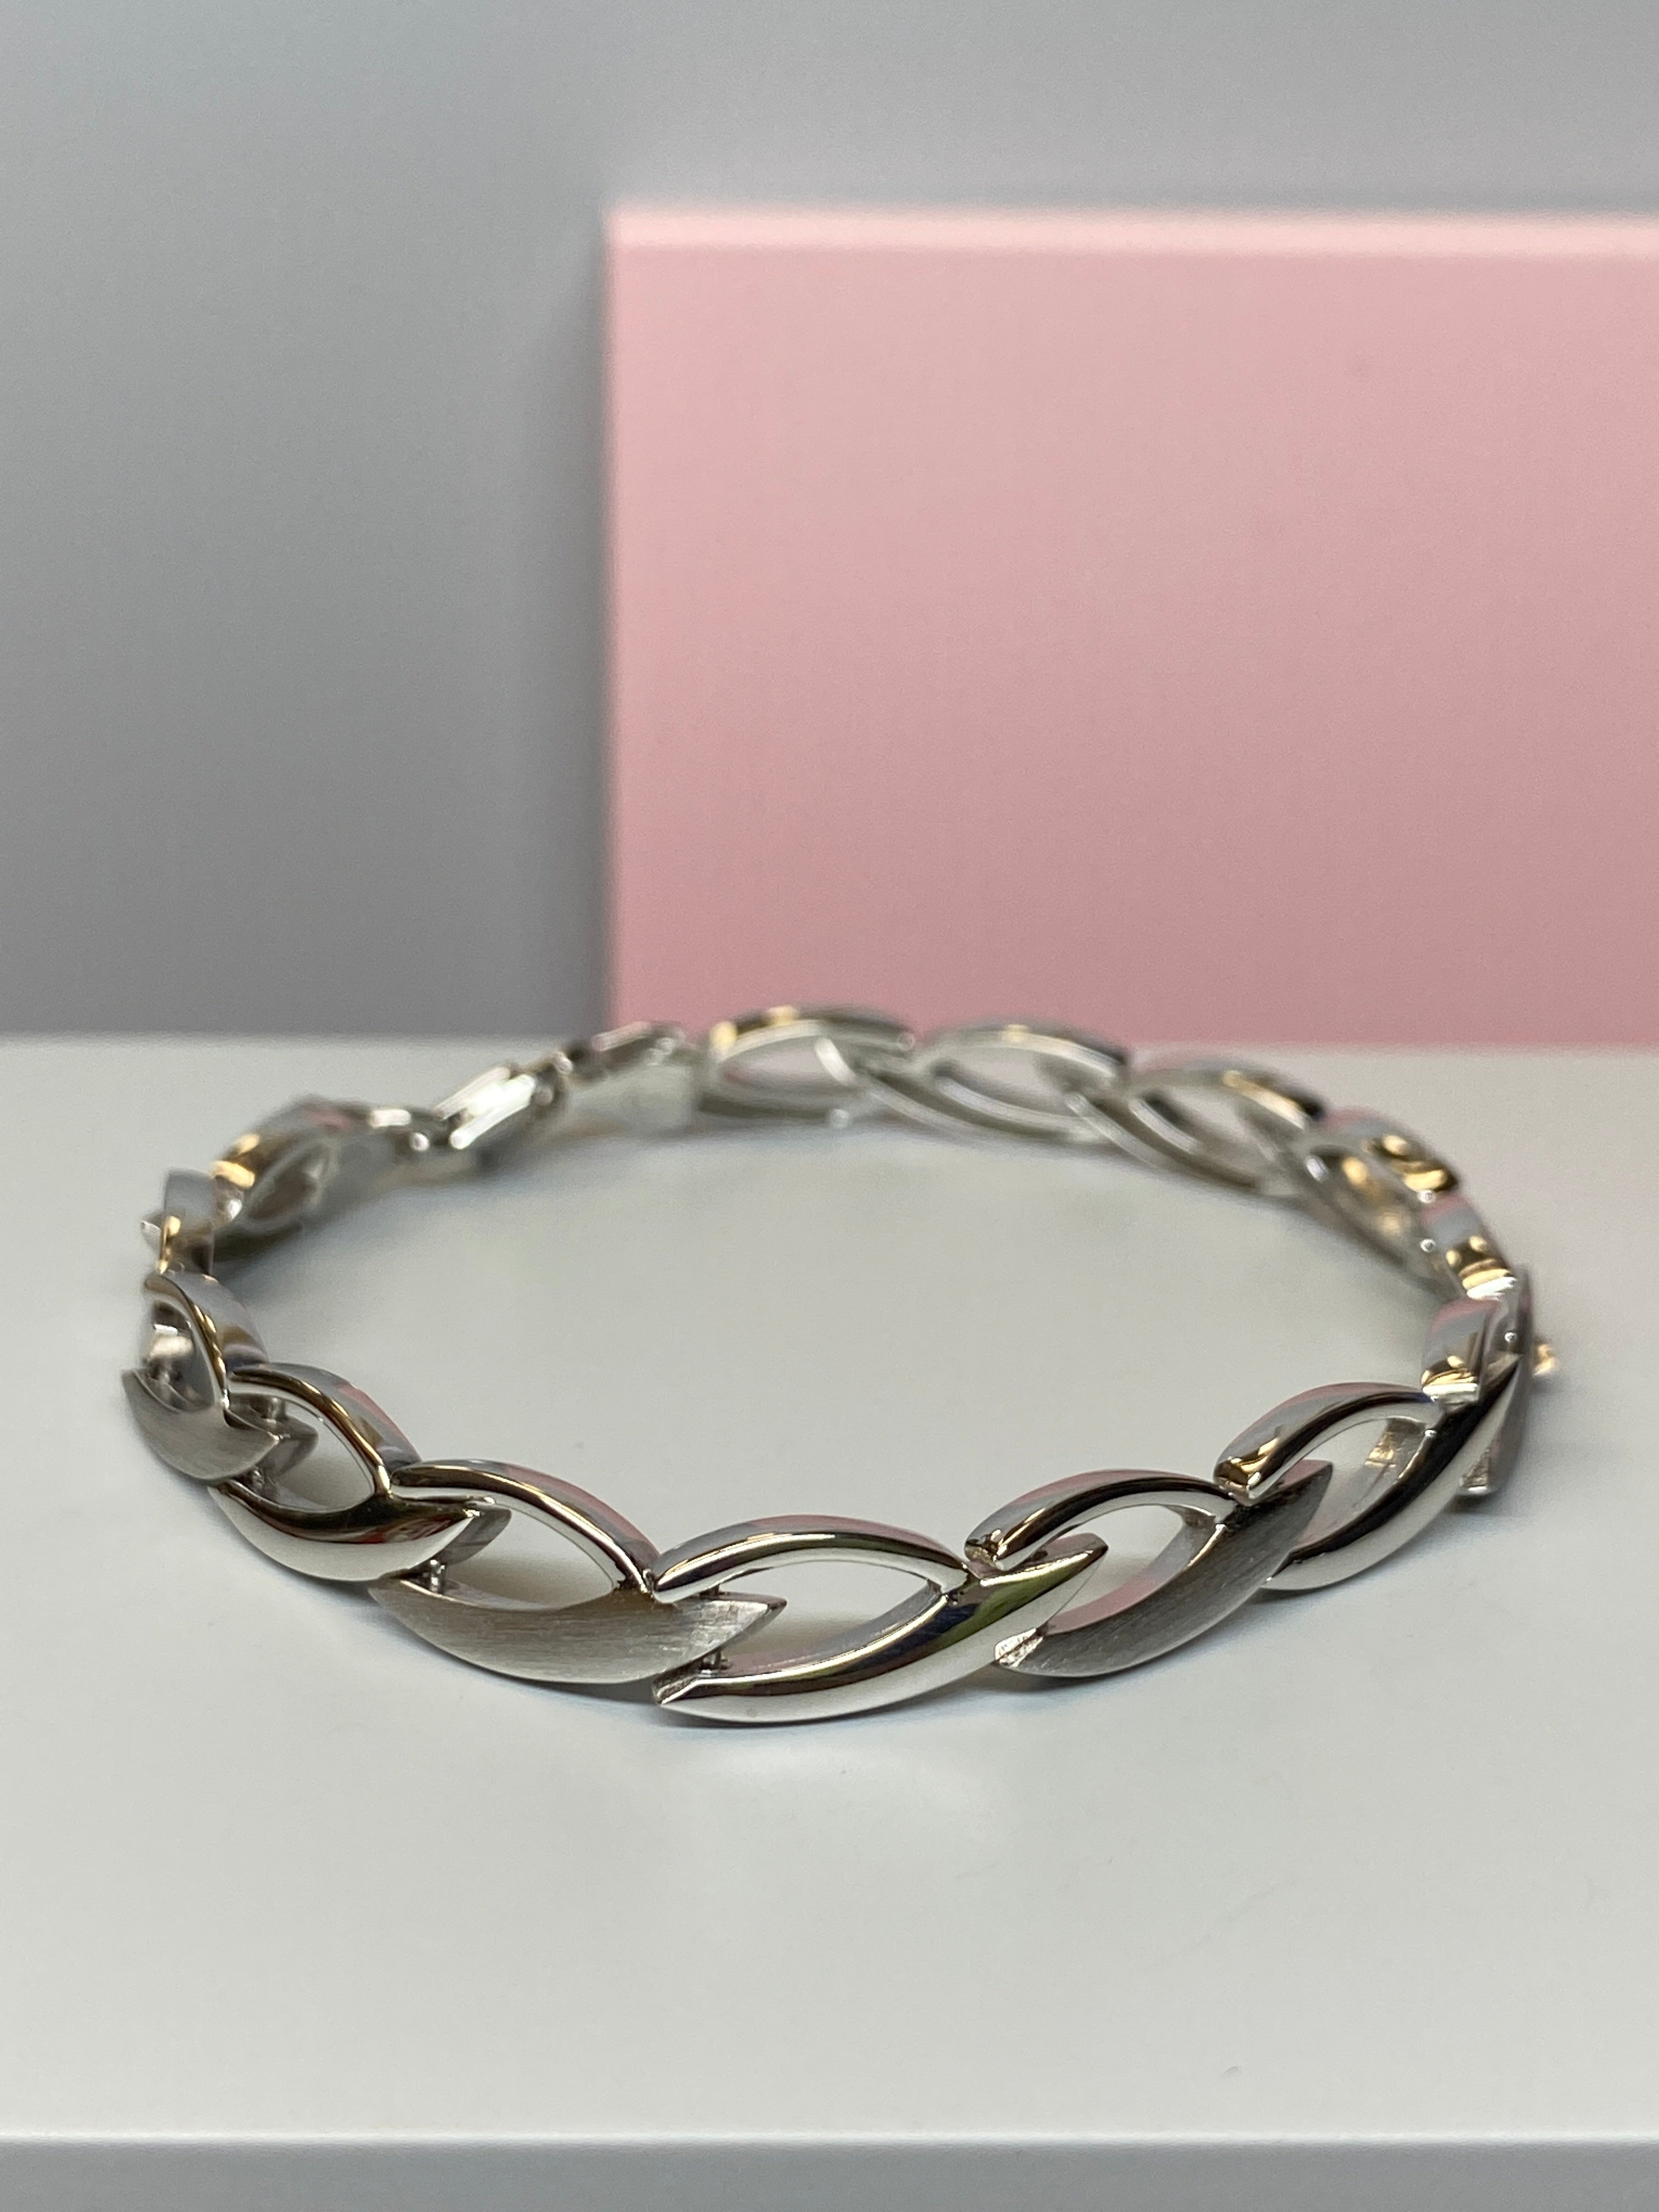 Silver Wave Patterned Bracelet - Hallmark Jewellers Formby & The Jewellers Bench Widnes